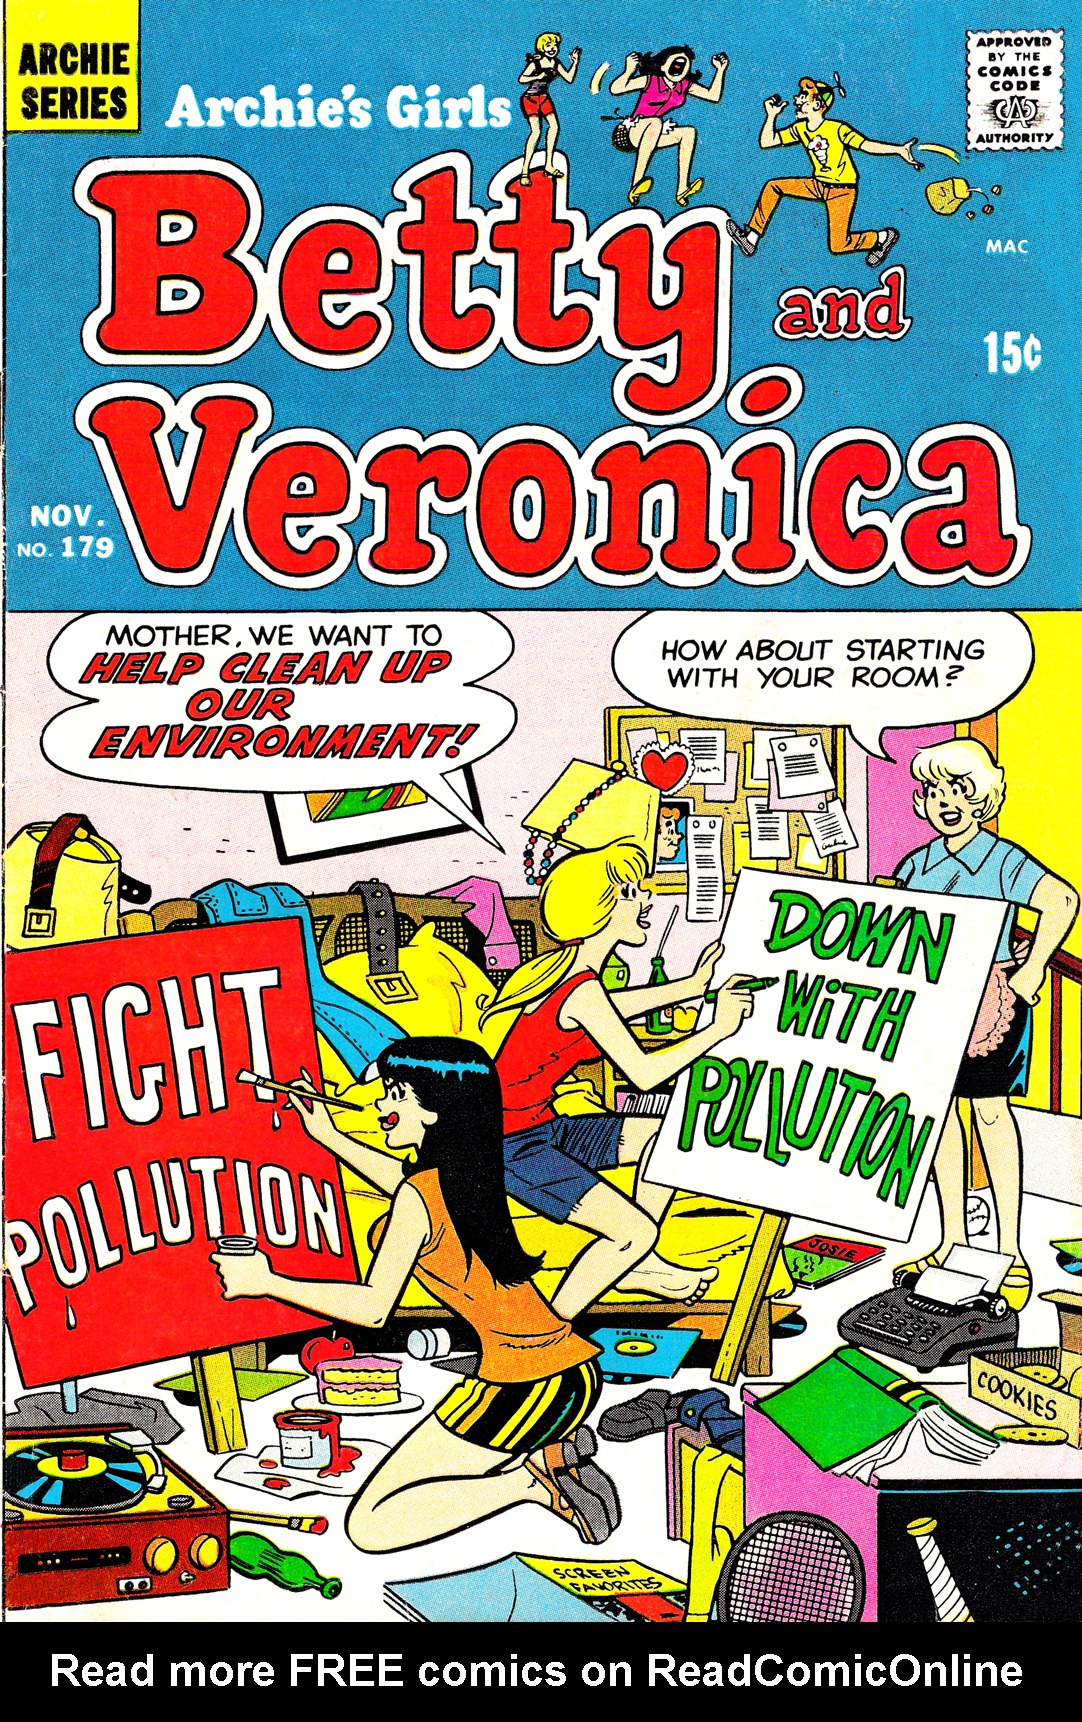 Read online Archie's Girls Betty and Veronica comic -  Issue #179 - 1